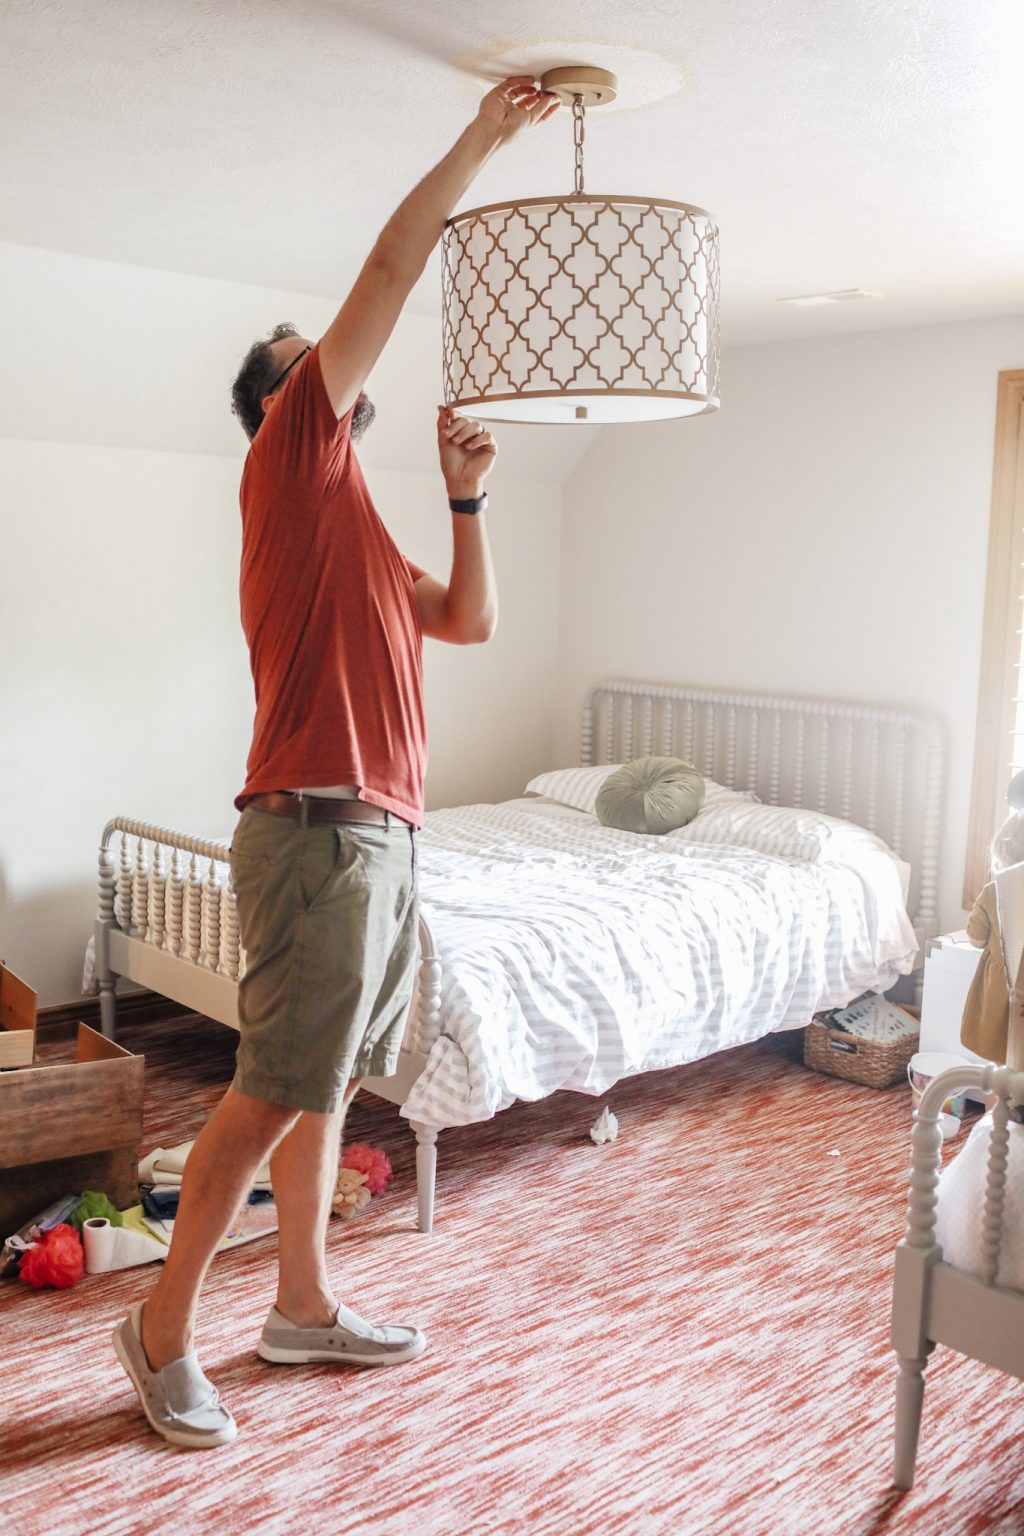 How to swap out a light fixture